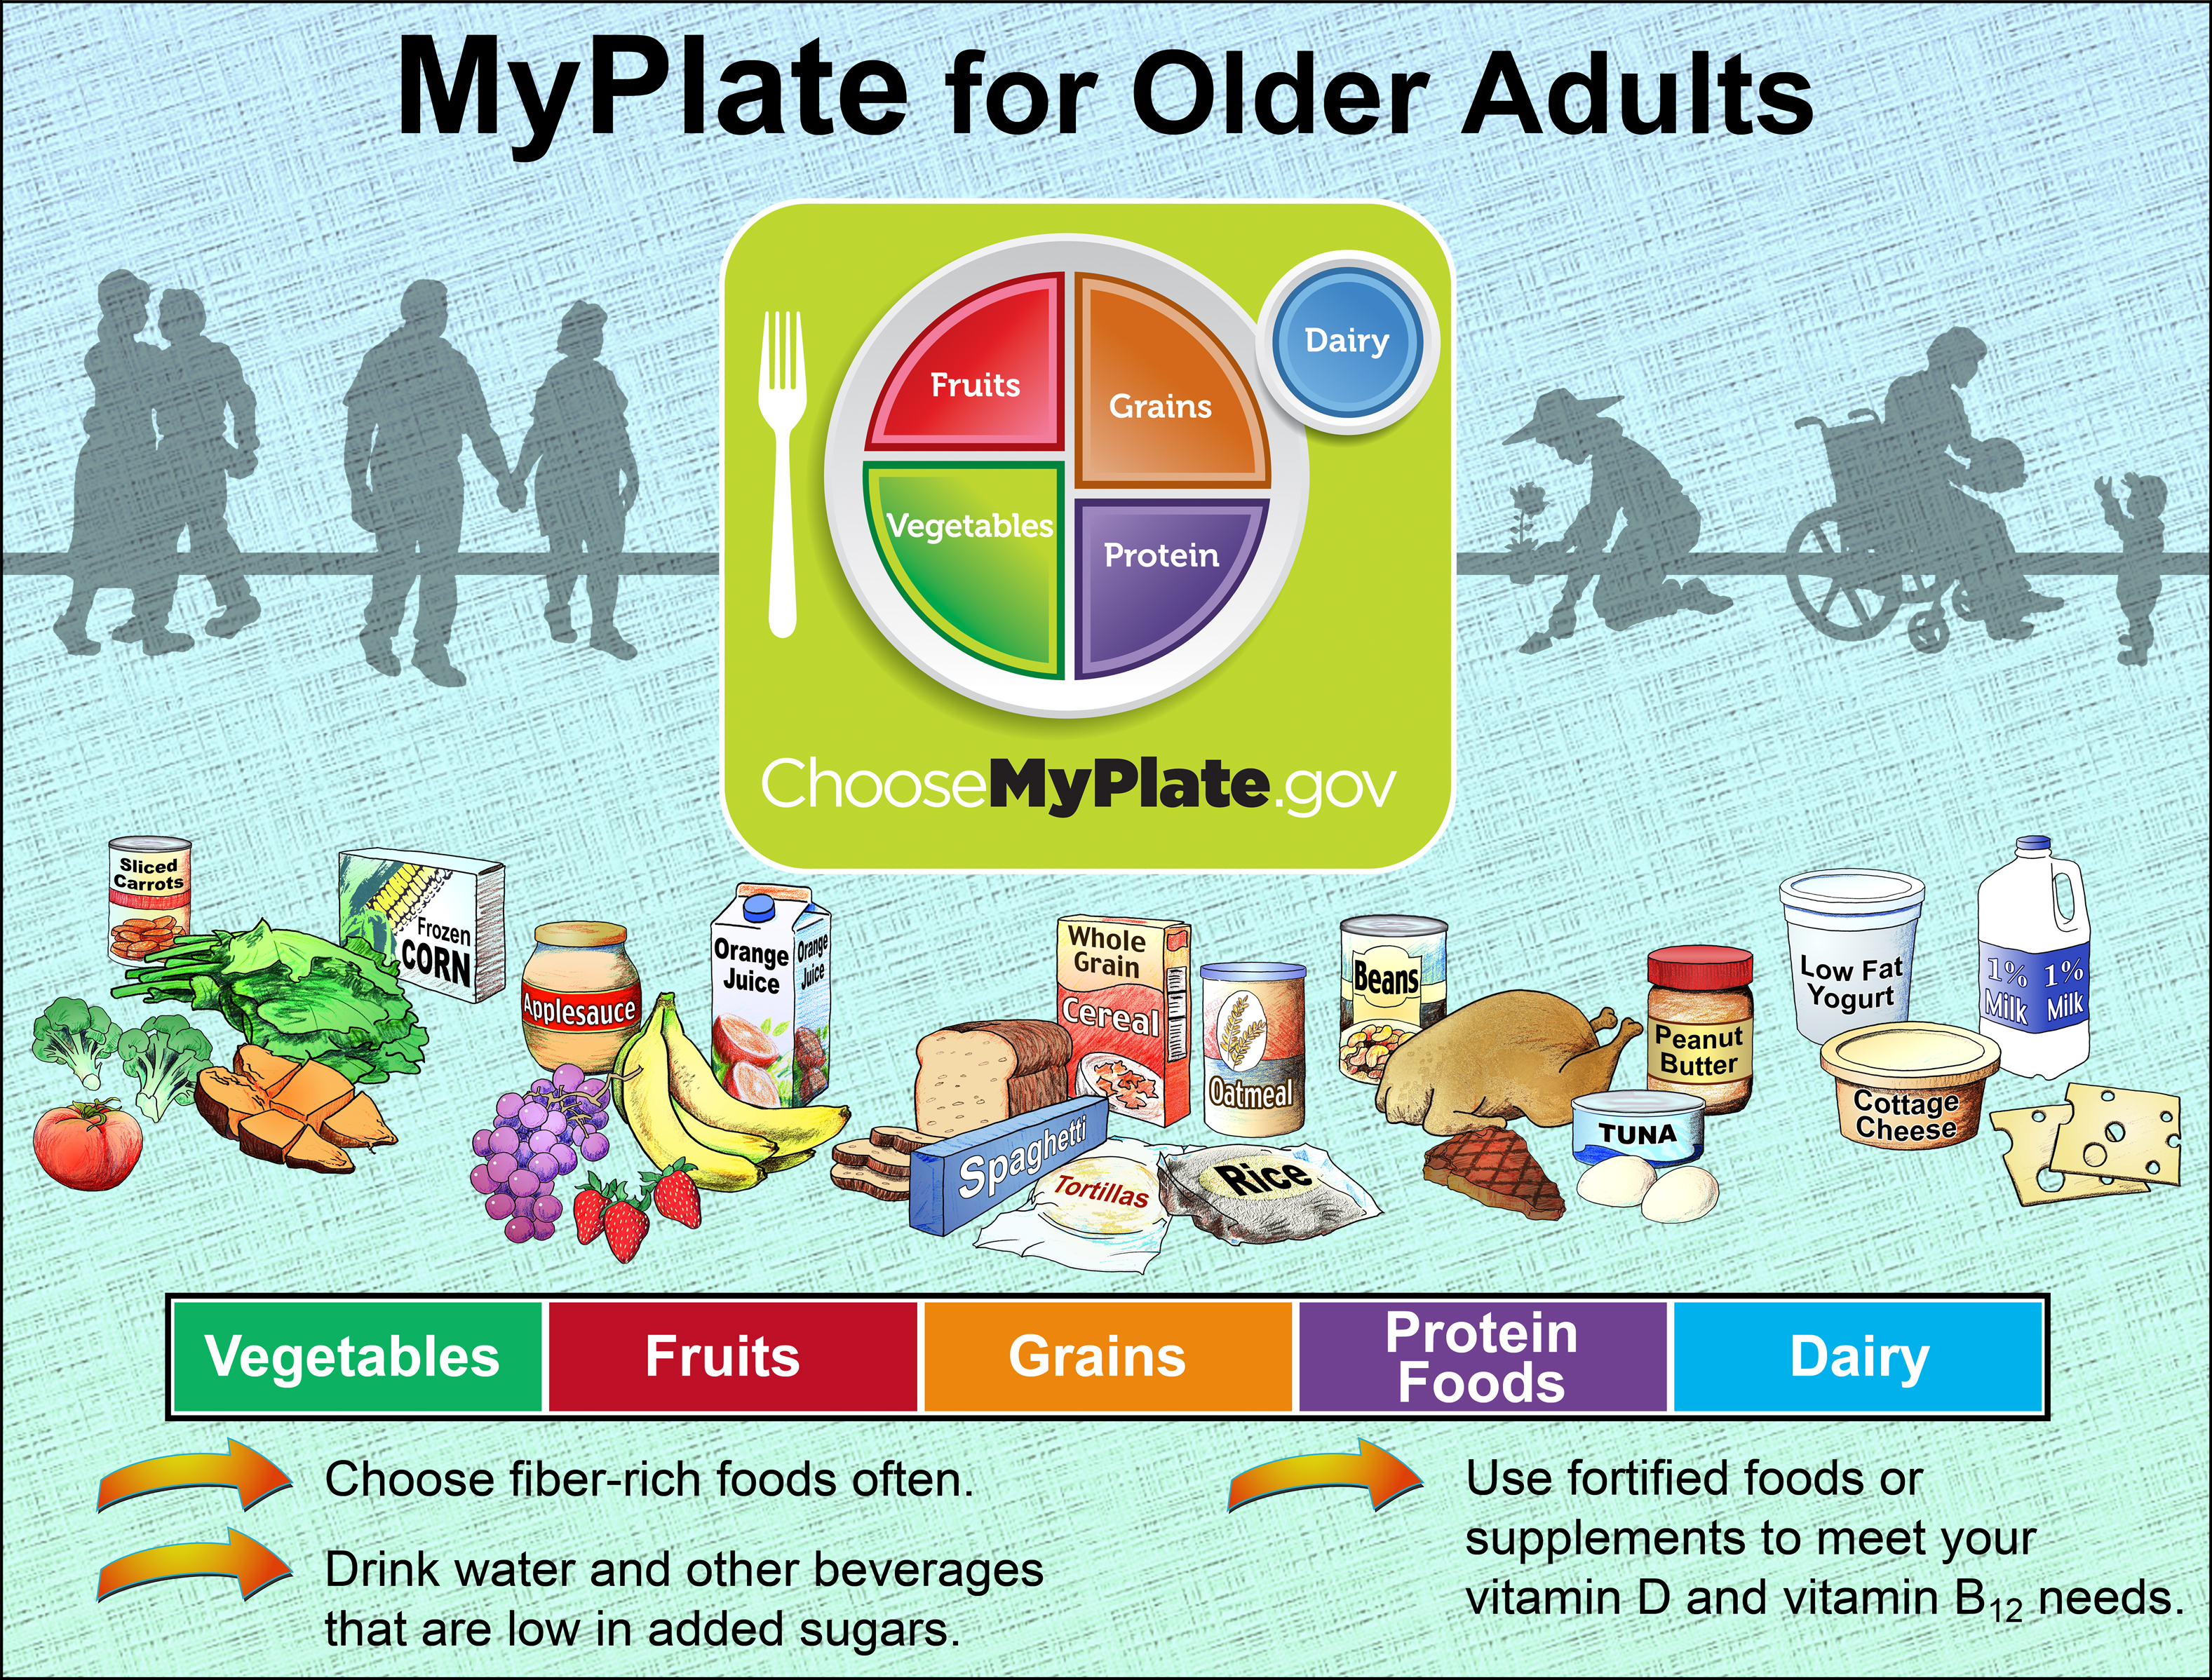 MyPlate for Older Adults from Florida Cooperative Extension, pdf version here.